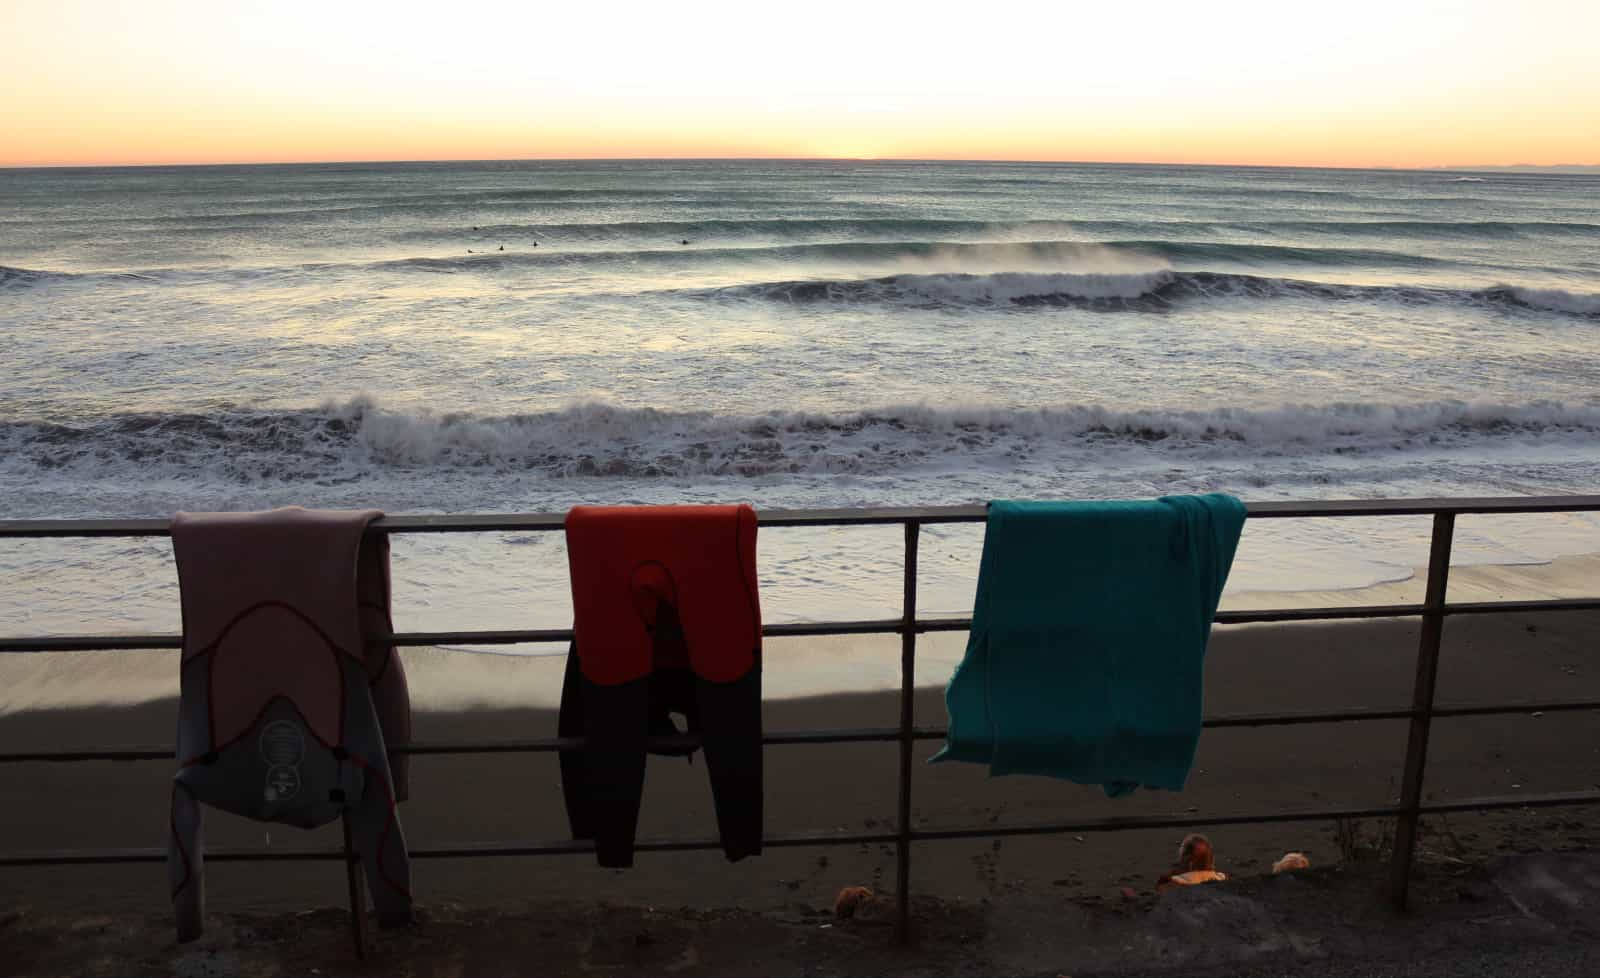 Drying our wetsuits and watching the surf